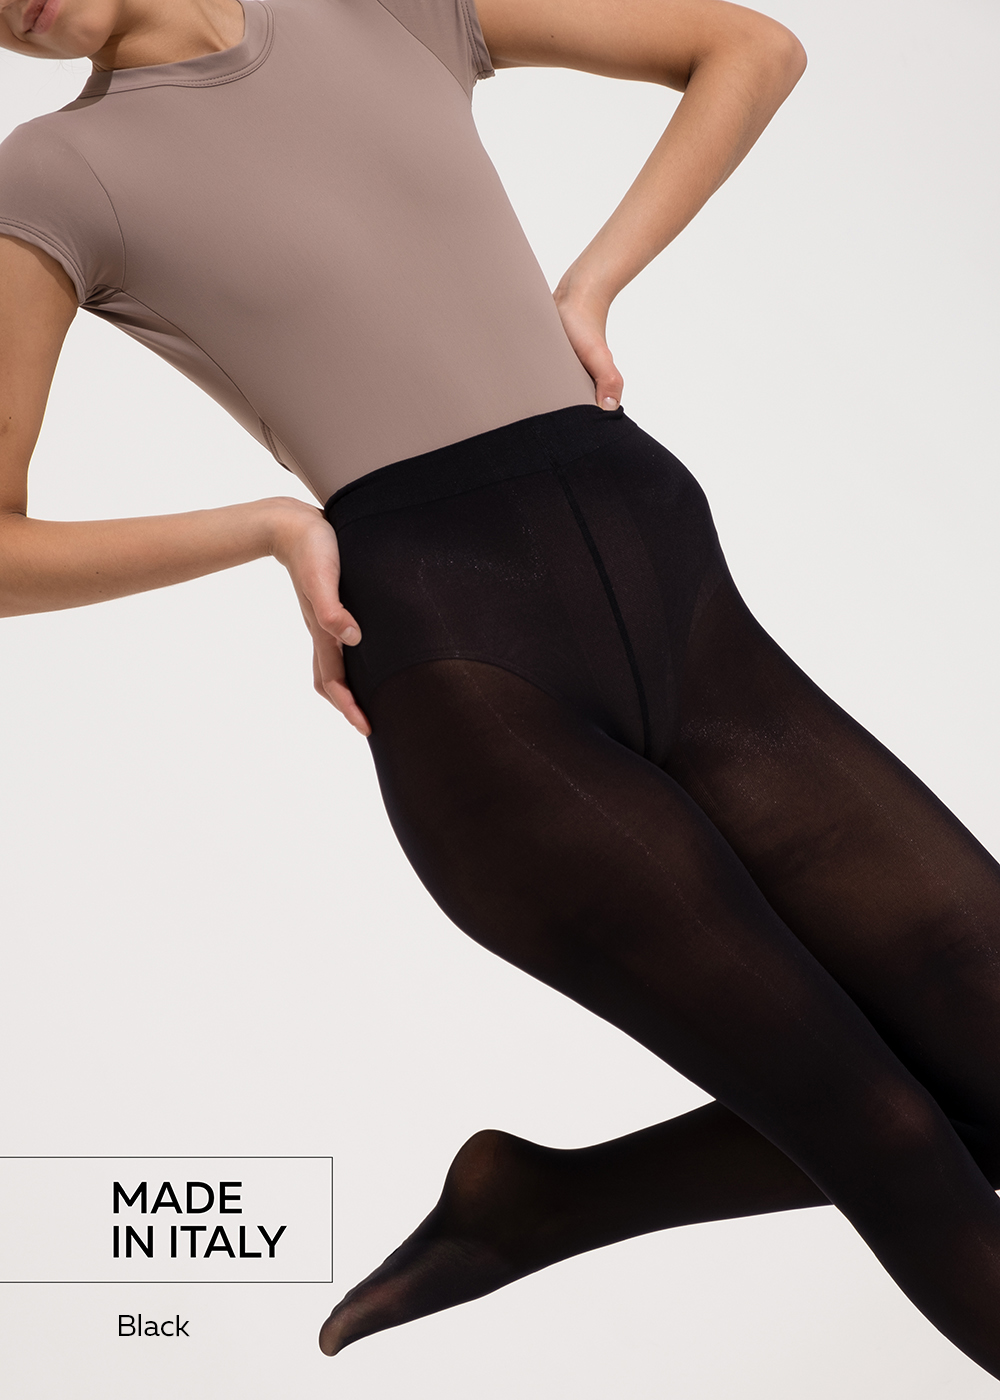 Footed microfiber tights (0050N)  Nikolay® - official online shop of  pointe shoes and dance apparel in the USA